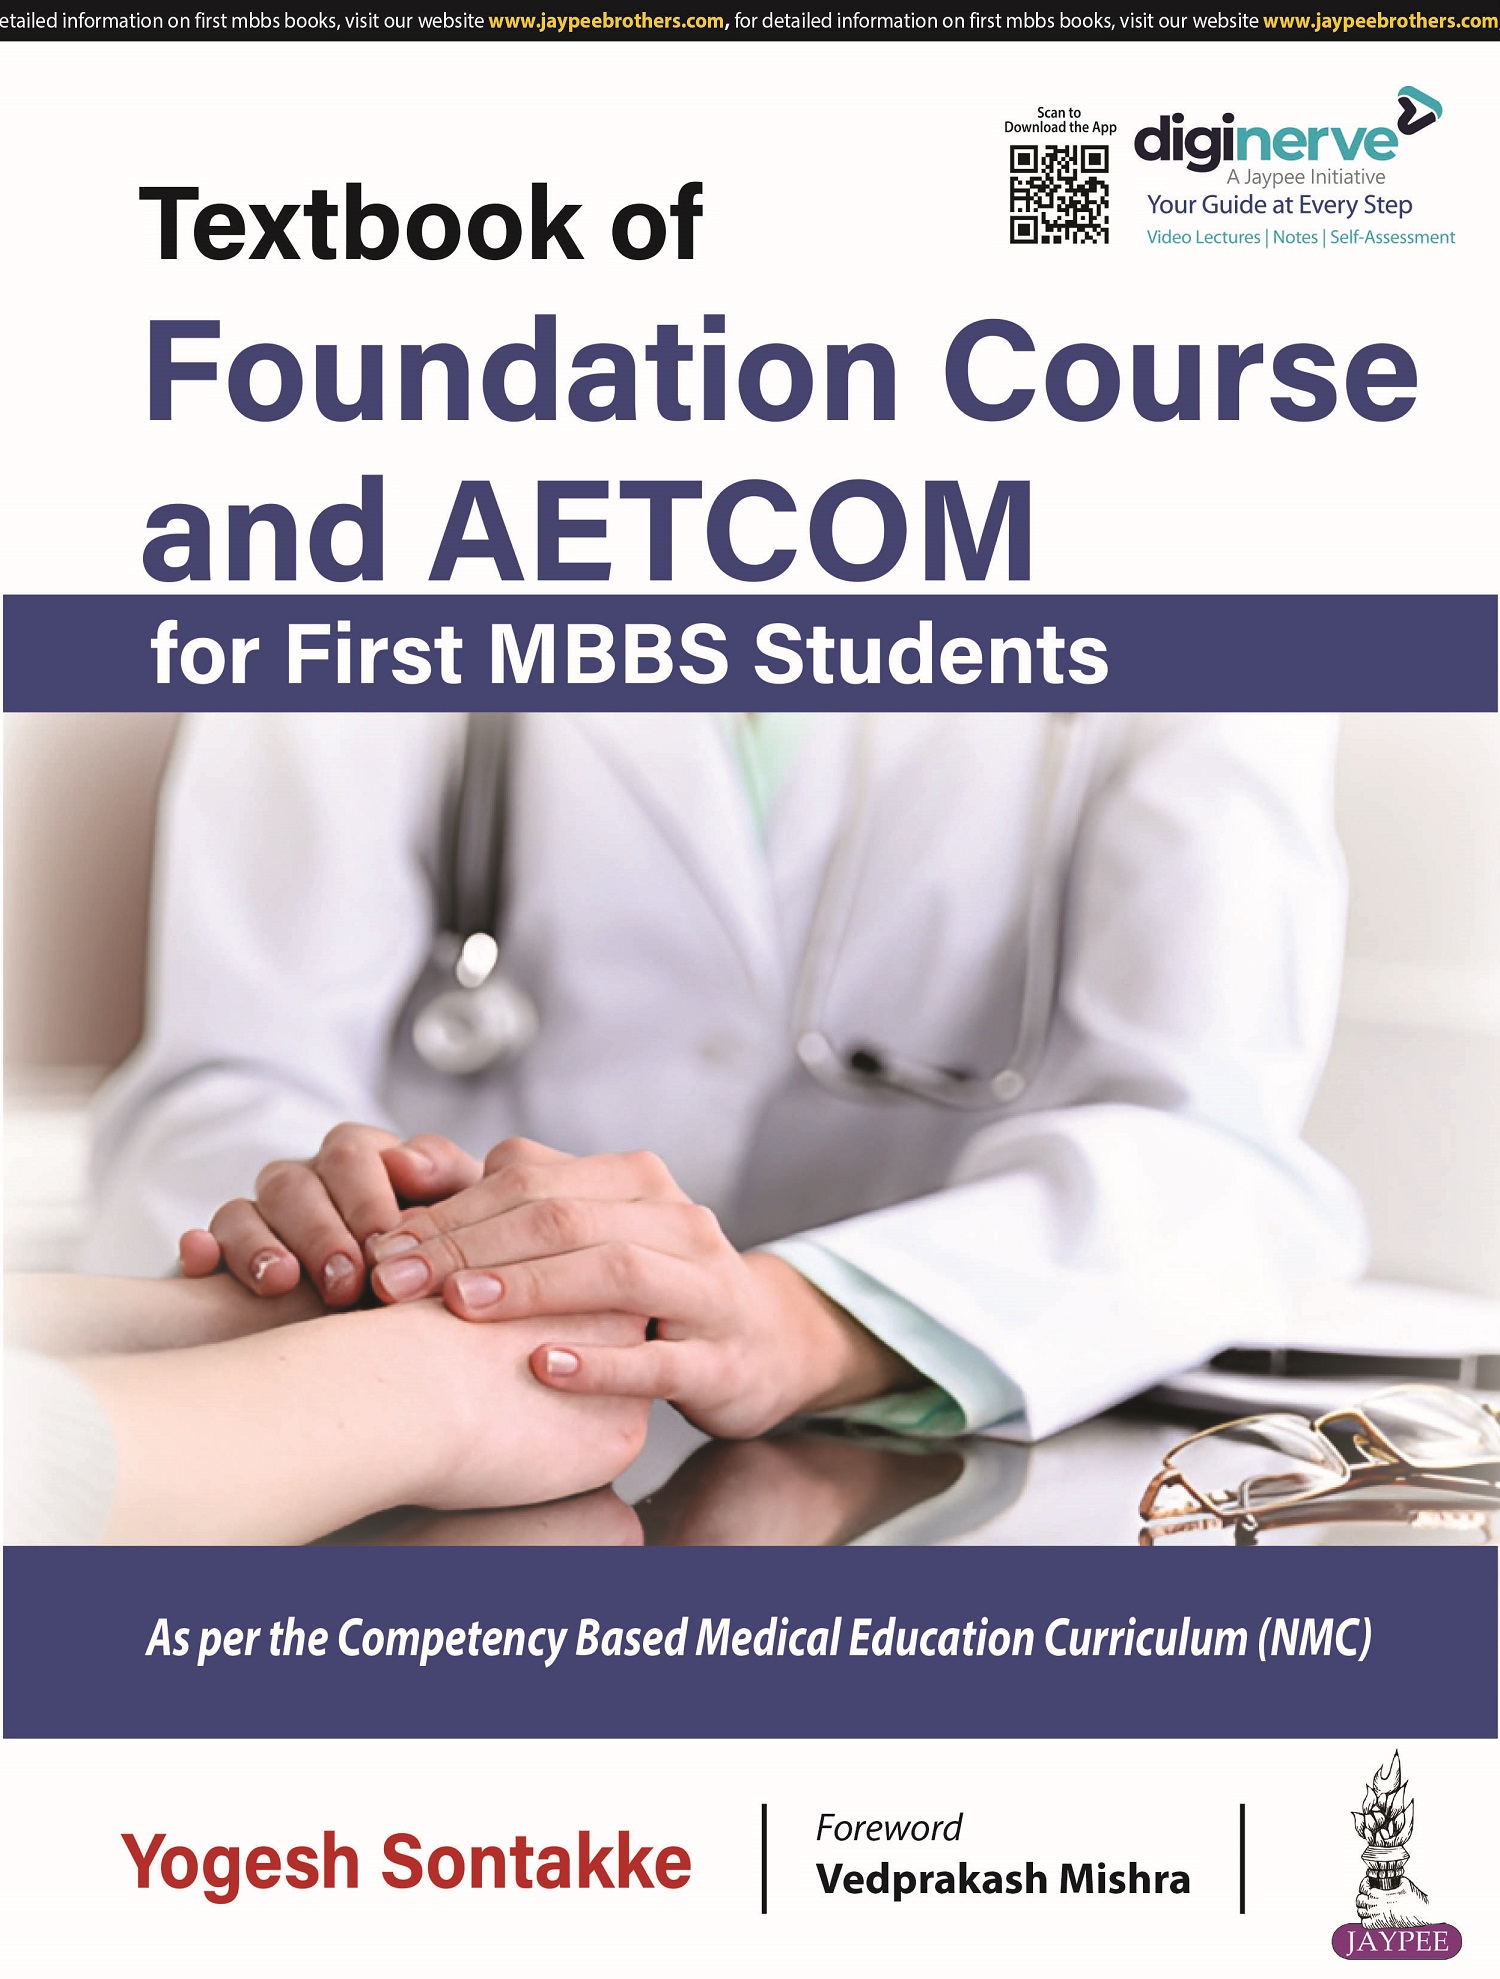 Textbook of Foundation Course and AETCOM for First MBBS Students